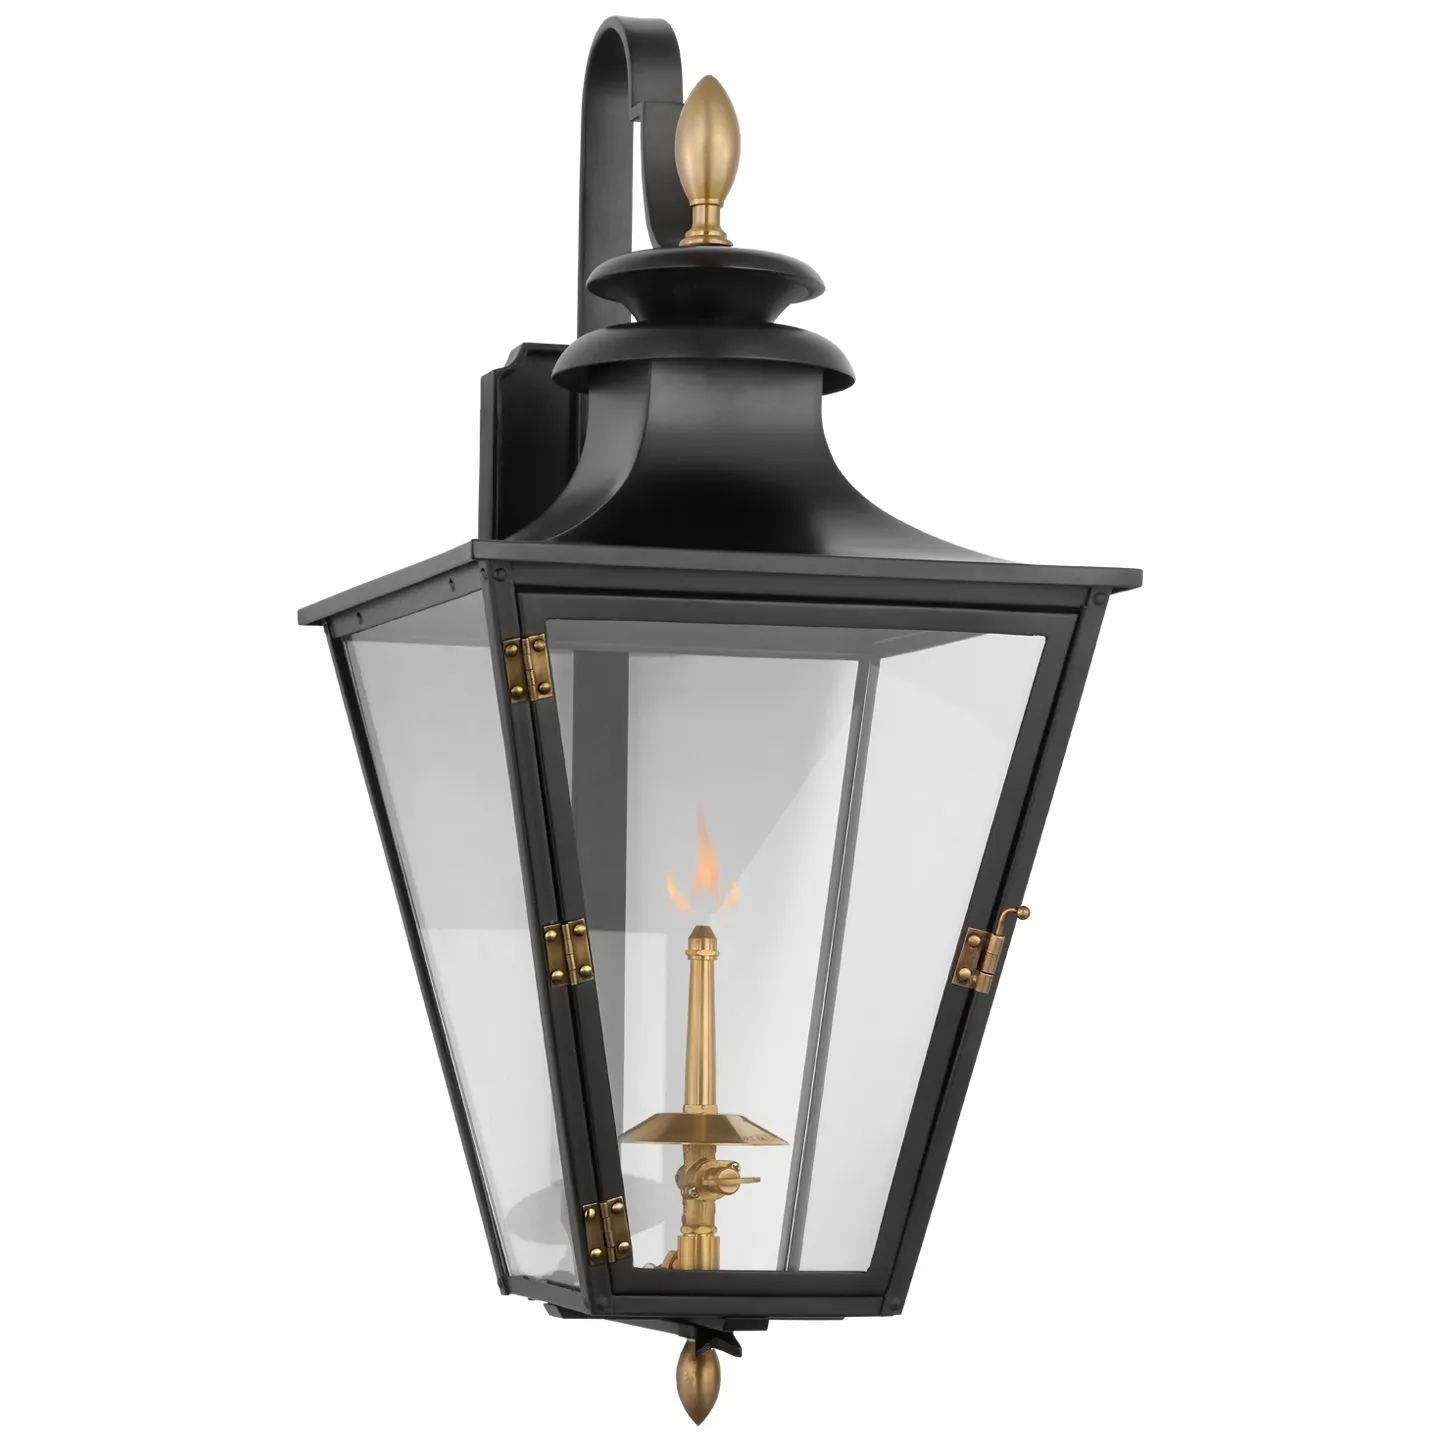 Albermarle Small Bracketed Gas Wall Lantern in Matte Black and Brass with Clear Glass